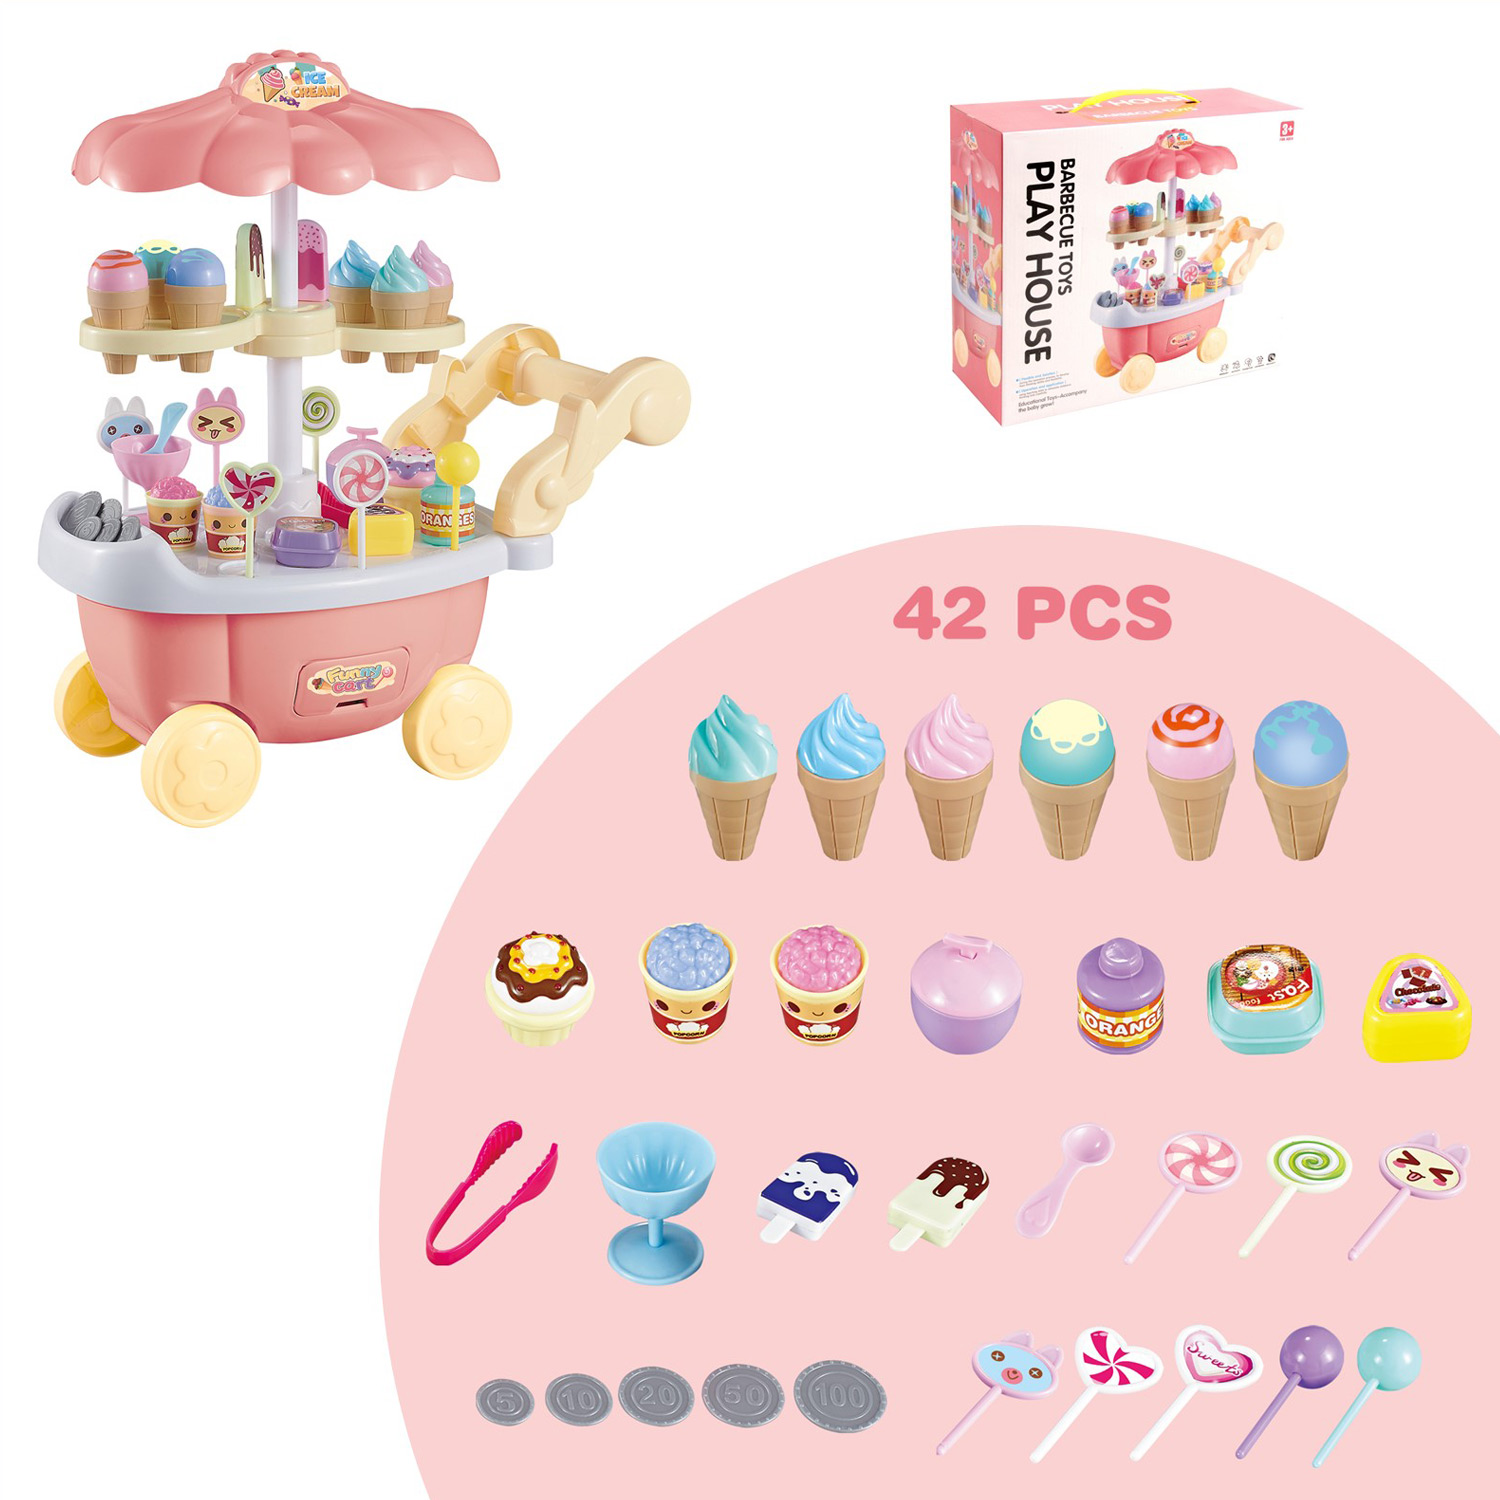 Ice Cream Cart 39 Pieces Dessert Candy Trolley Kitchen Toy Set With Lights Music Includes Umbrella Food Accessories 3 feet tall Childrens Pretend Play Truck Playset Appliance Set Pieces Perfect For Early Learning Educational Girls Cooking TK-10